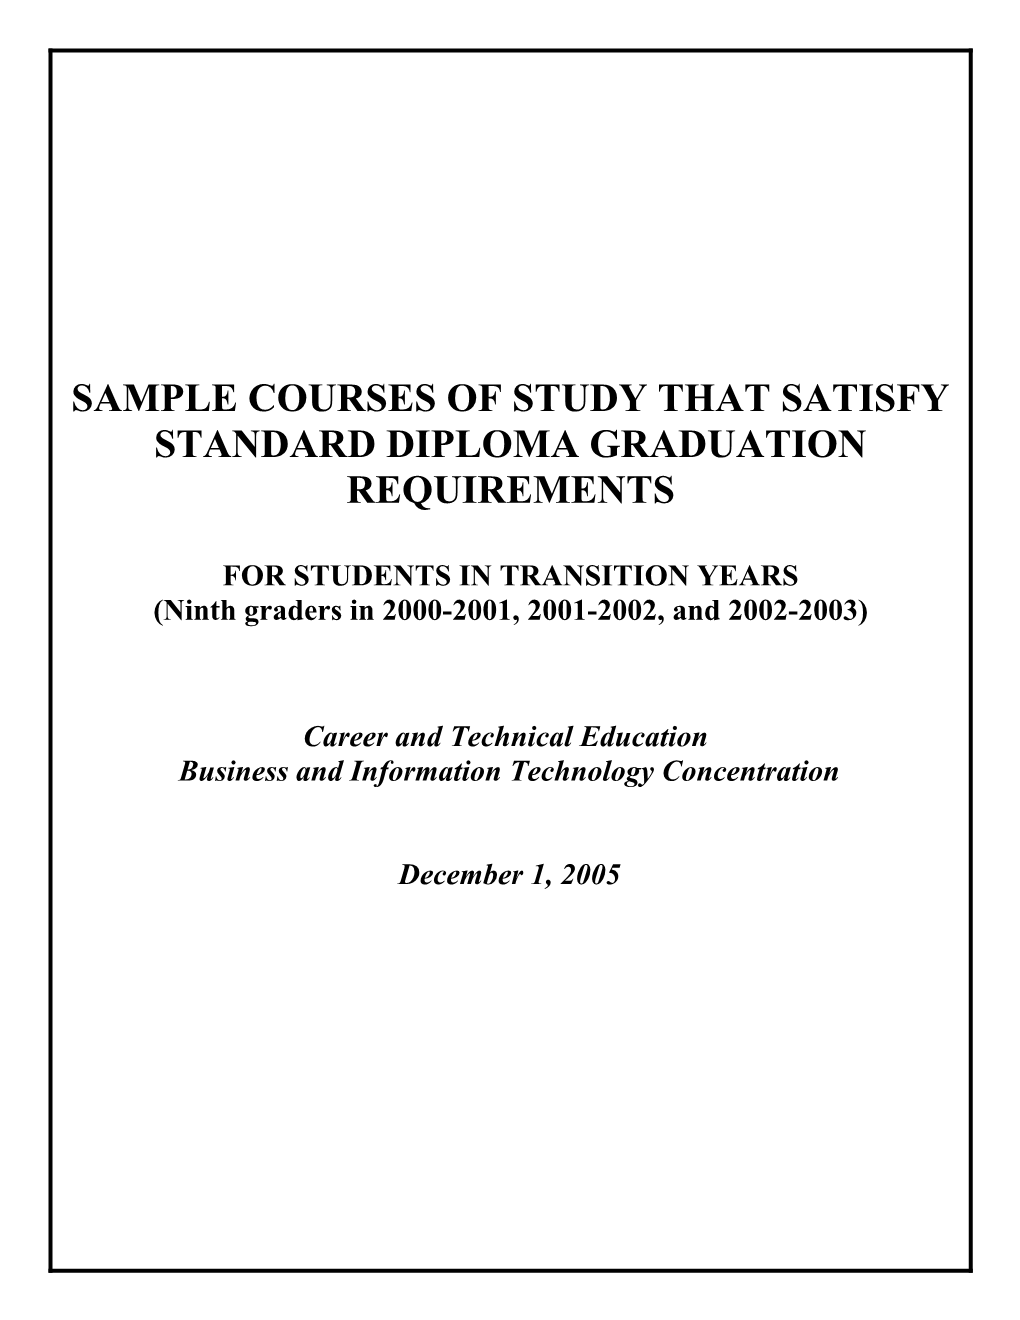 Sample Courses of Study